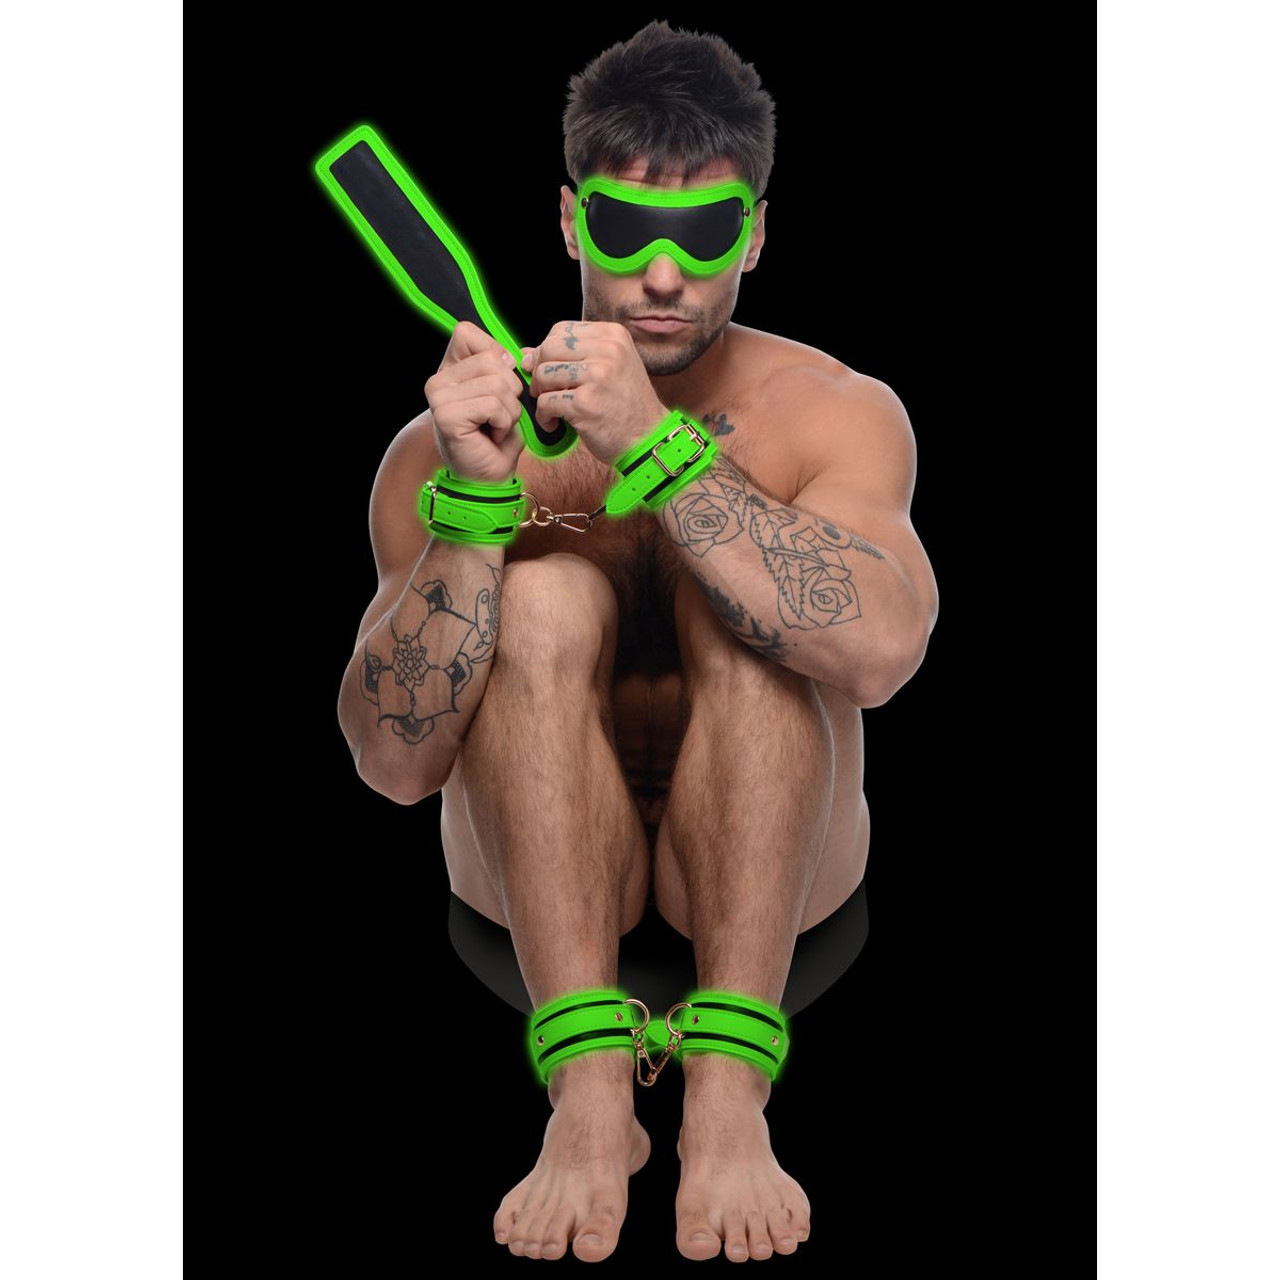 Kink in the Dark Glowing Cuffs, Blindfold, and Paddle Bondage Set product image